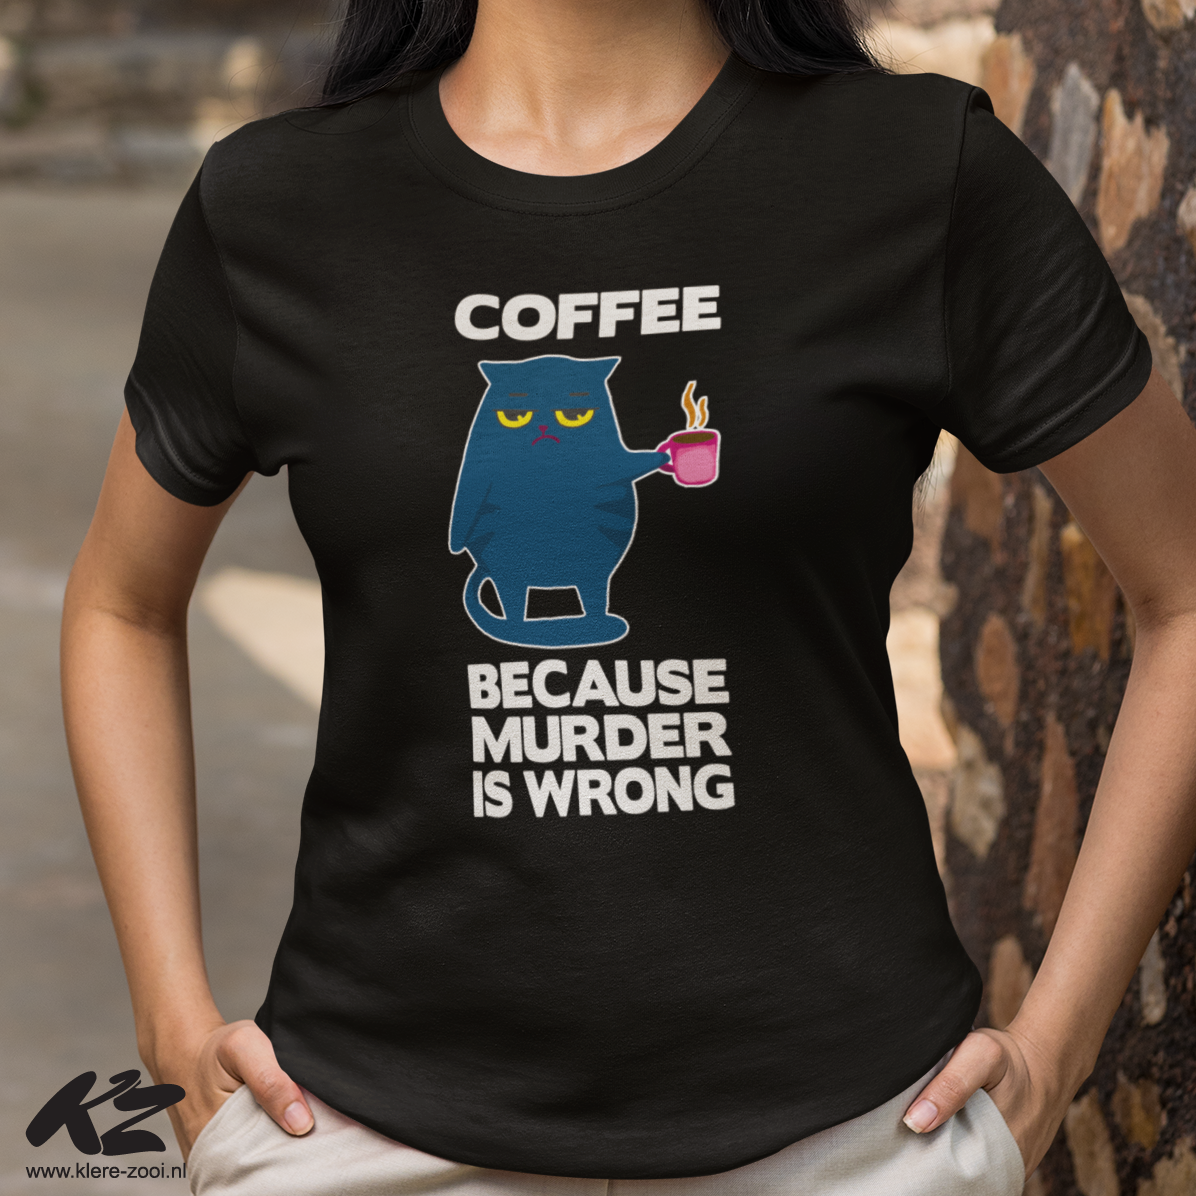 Coffee, Because Murder Is Wrong